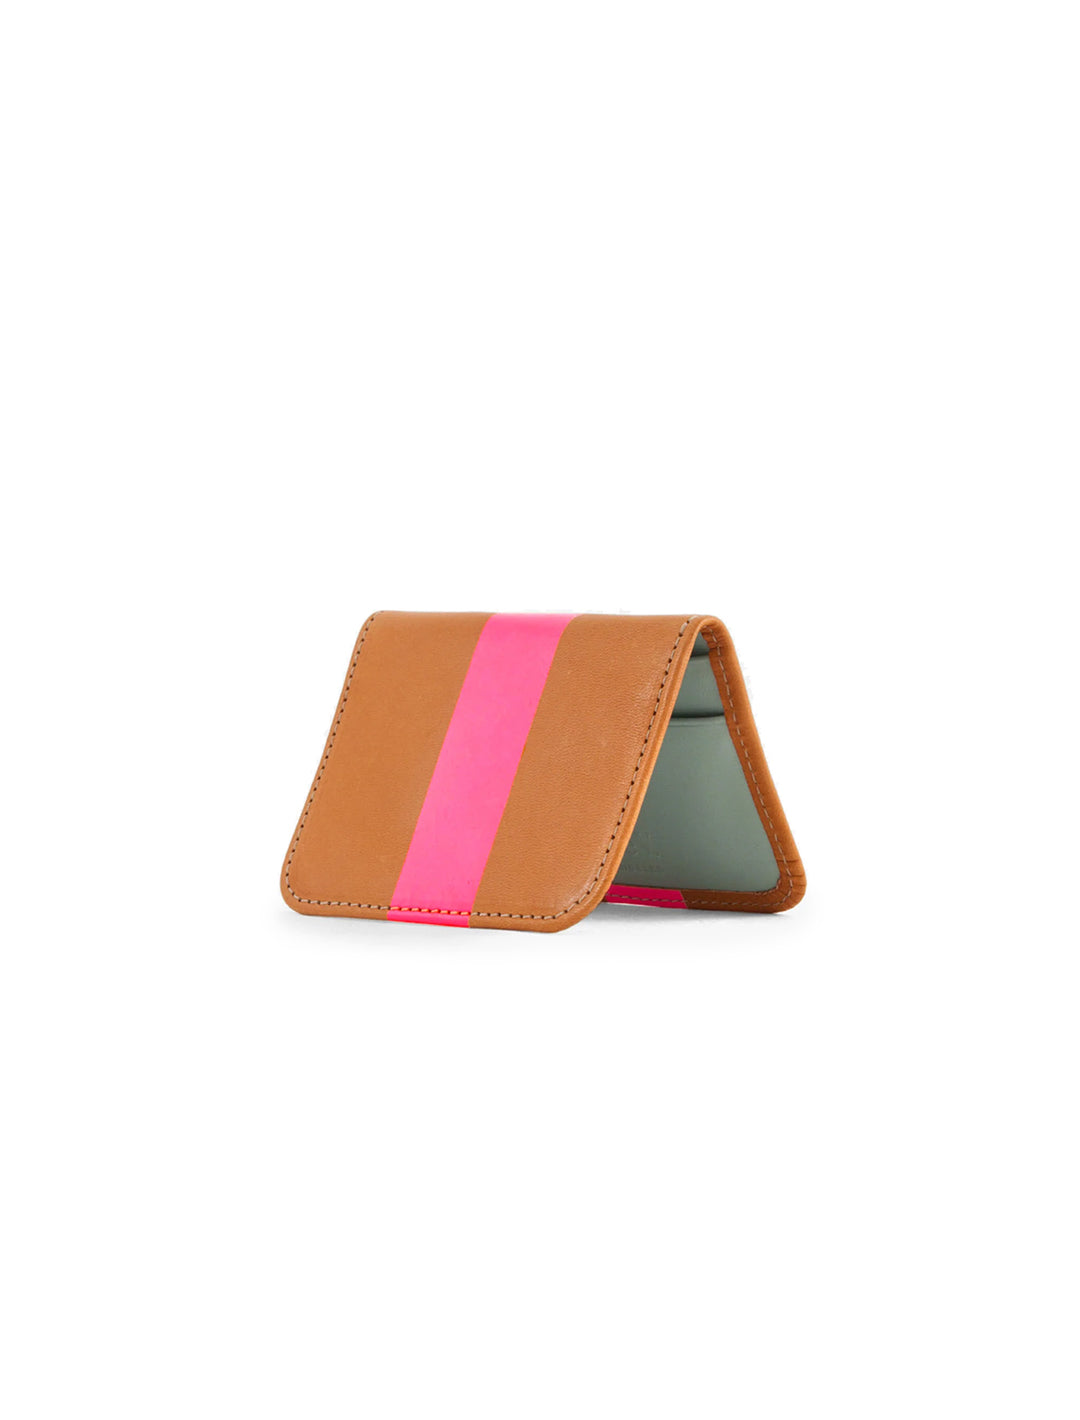 card case in natural rustic and neon stripe (2)